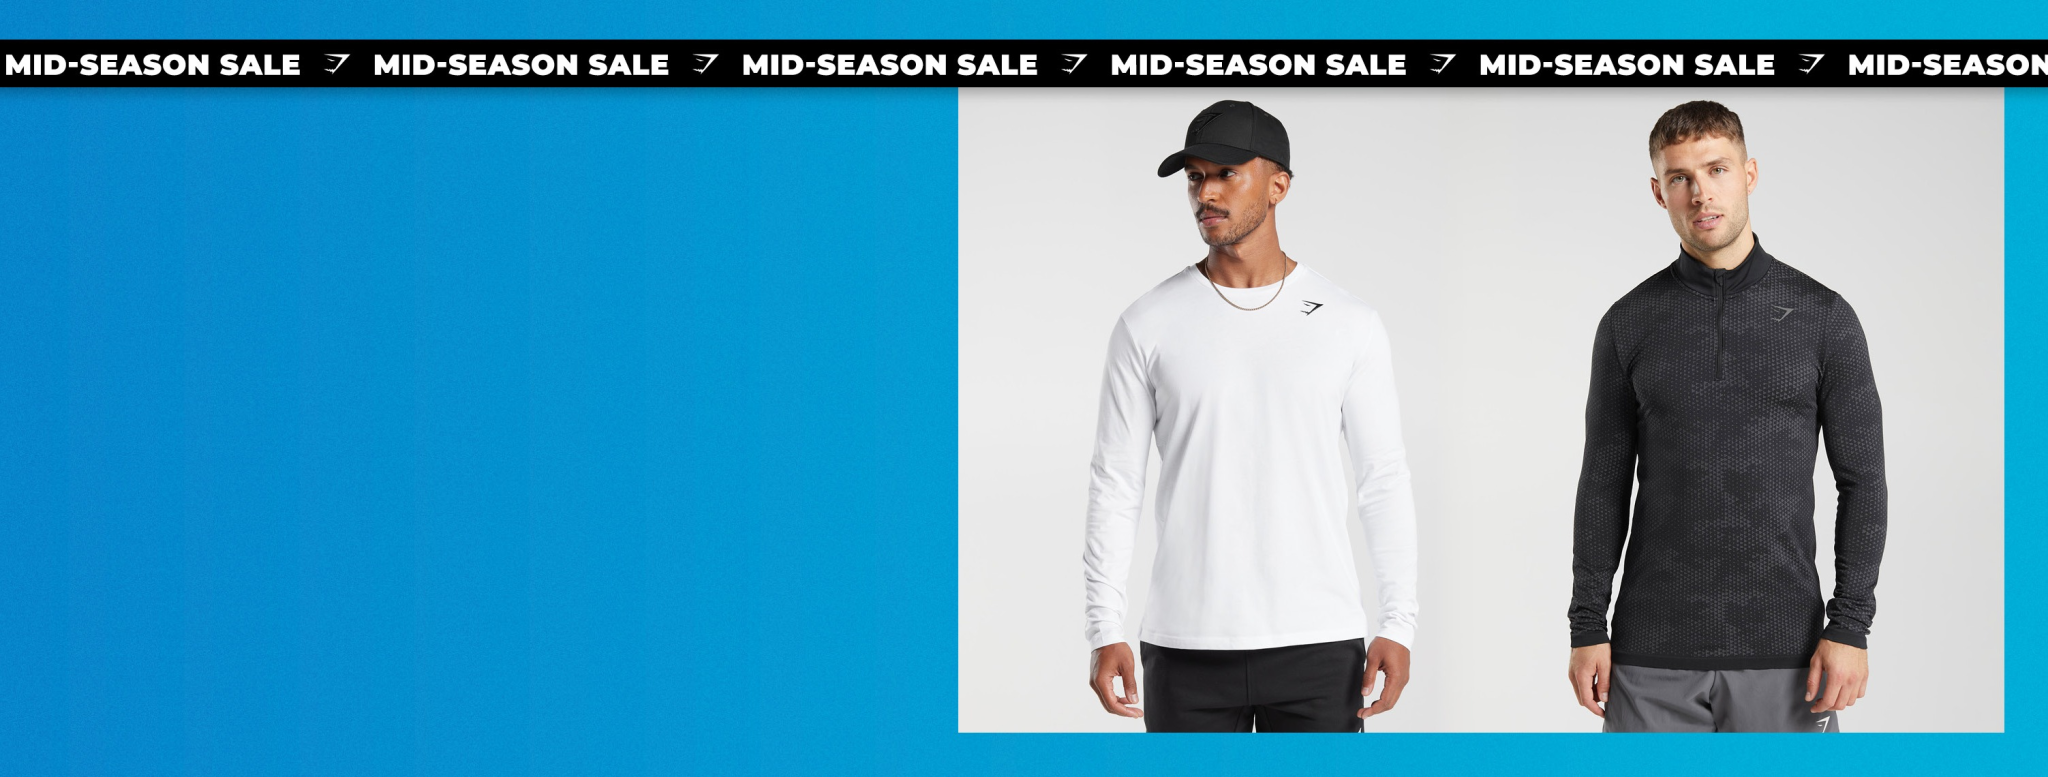 UP TO 50% OFF* FRESH TRAINING GEAR